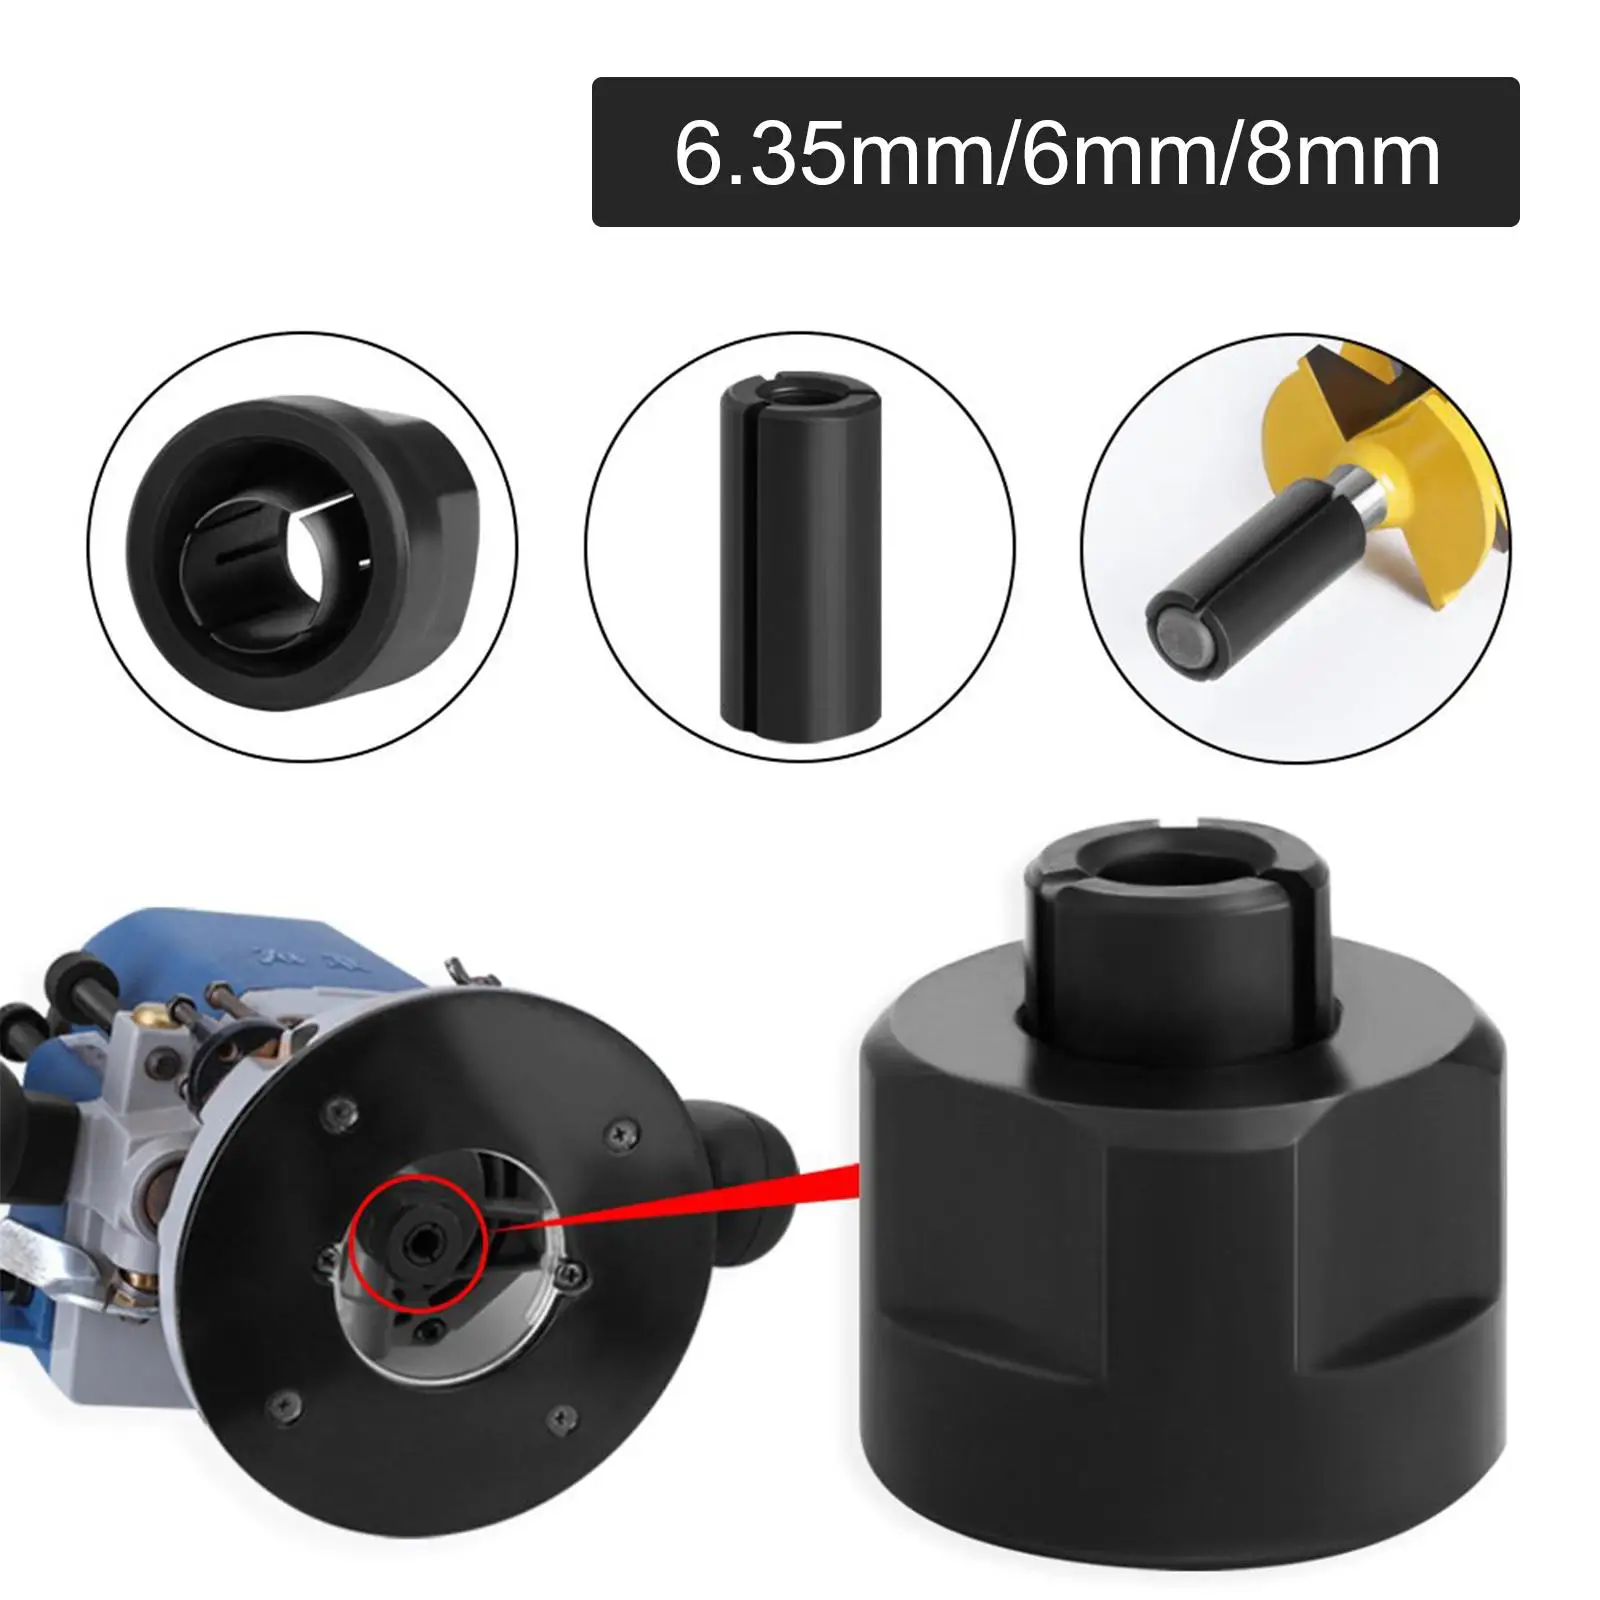 Router Collet Chuck Reduction Sleeve Collet Reduction Shank High Precision Nut Cutting Adapter for Engraving Machine Woodworking